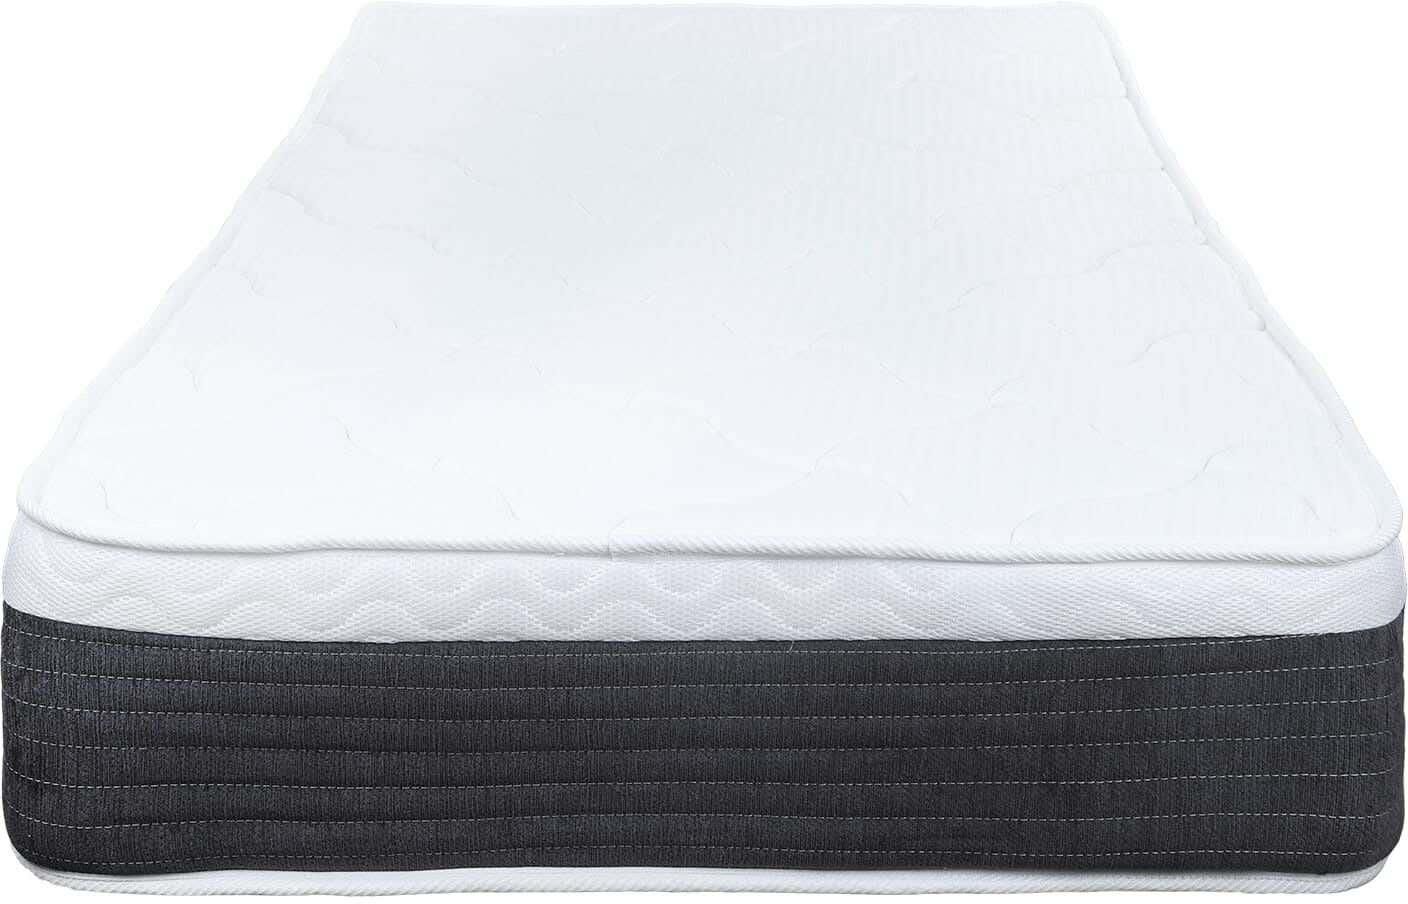 Get Family Bed Genowa Single Zippers Mattress, 120×195×25cm - White with best offers | Raneen.com